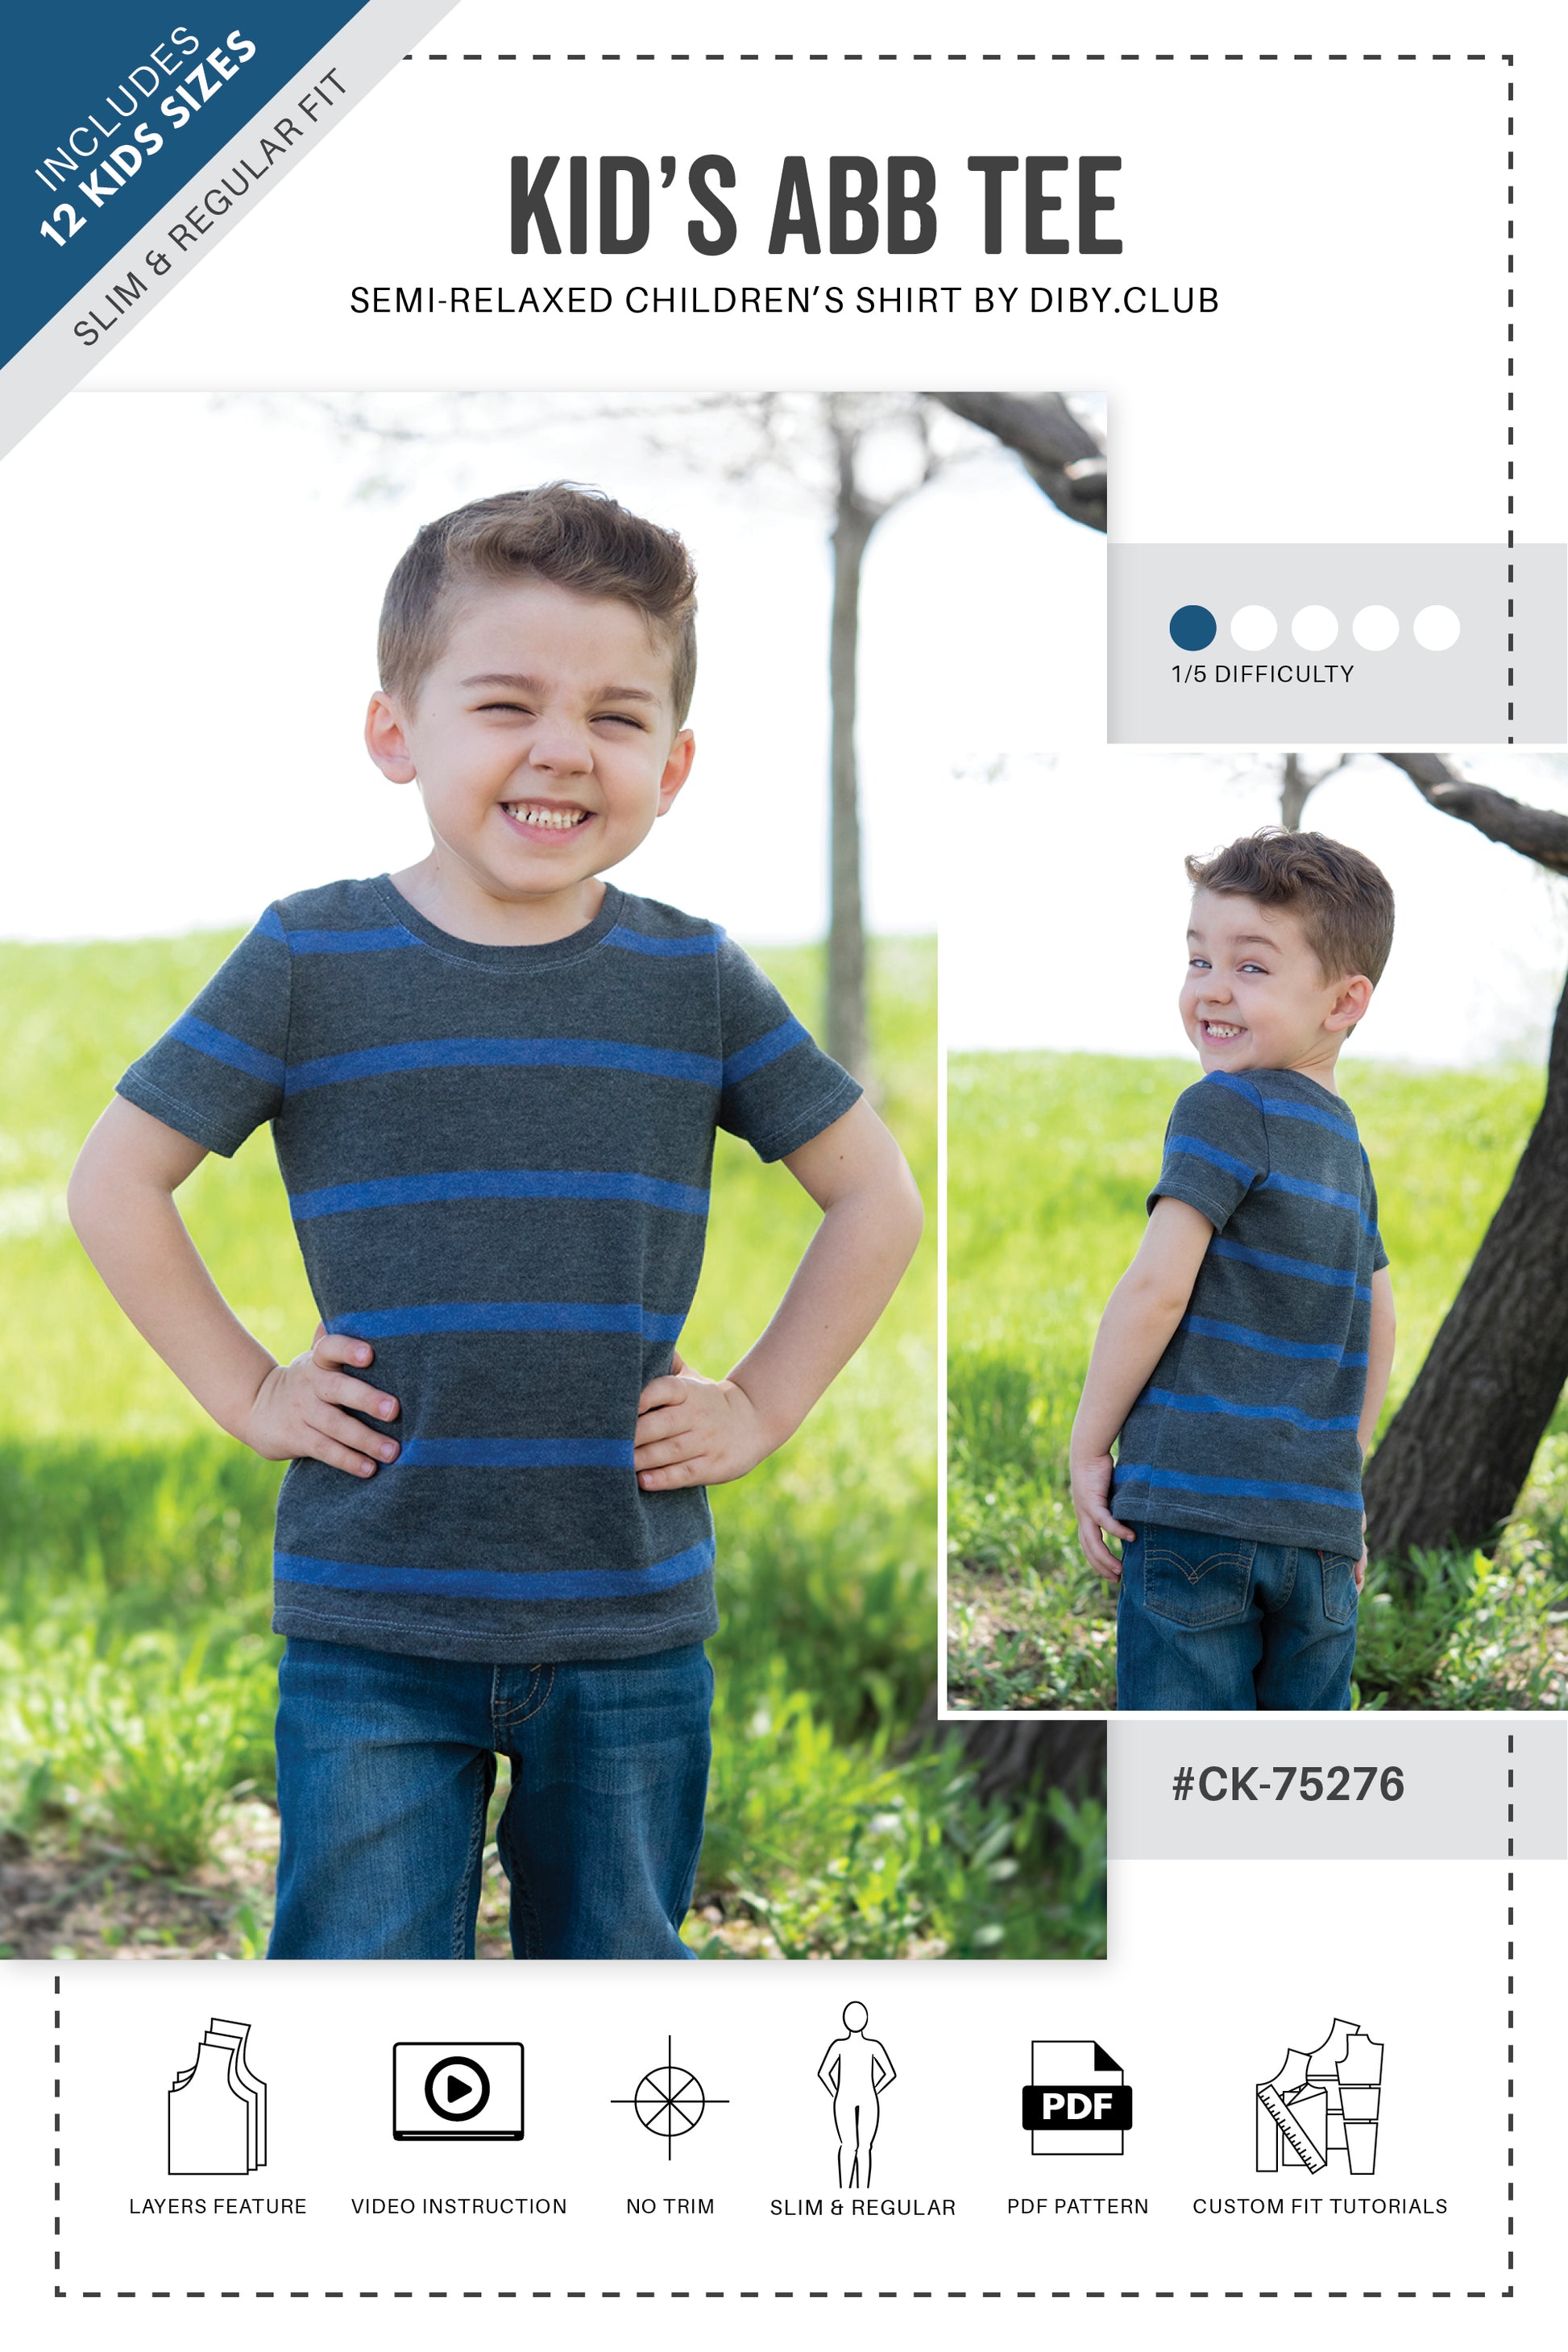 Pattern cover. Shows two photos of little boy in the shirt. "Includes 12 kids sizes. Slime and regular fit. Layers feature, video instructions, no trim, slim and regular, PDF pattern, custom fit tutorials."